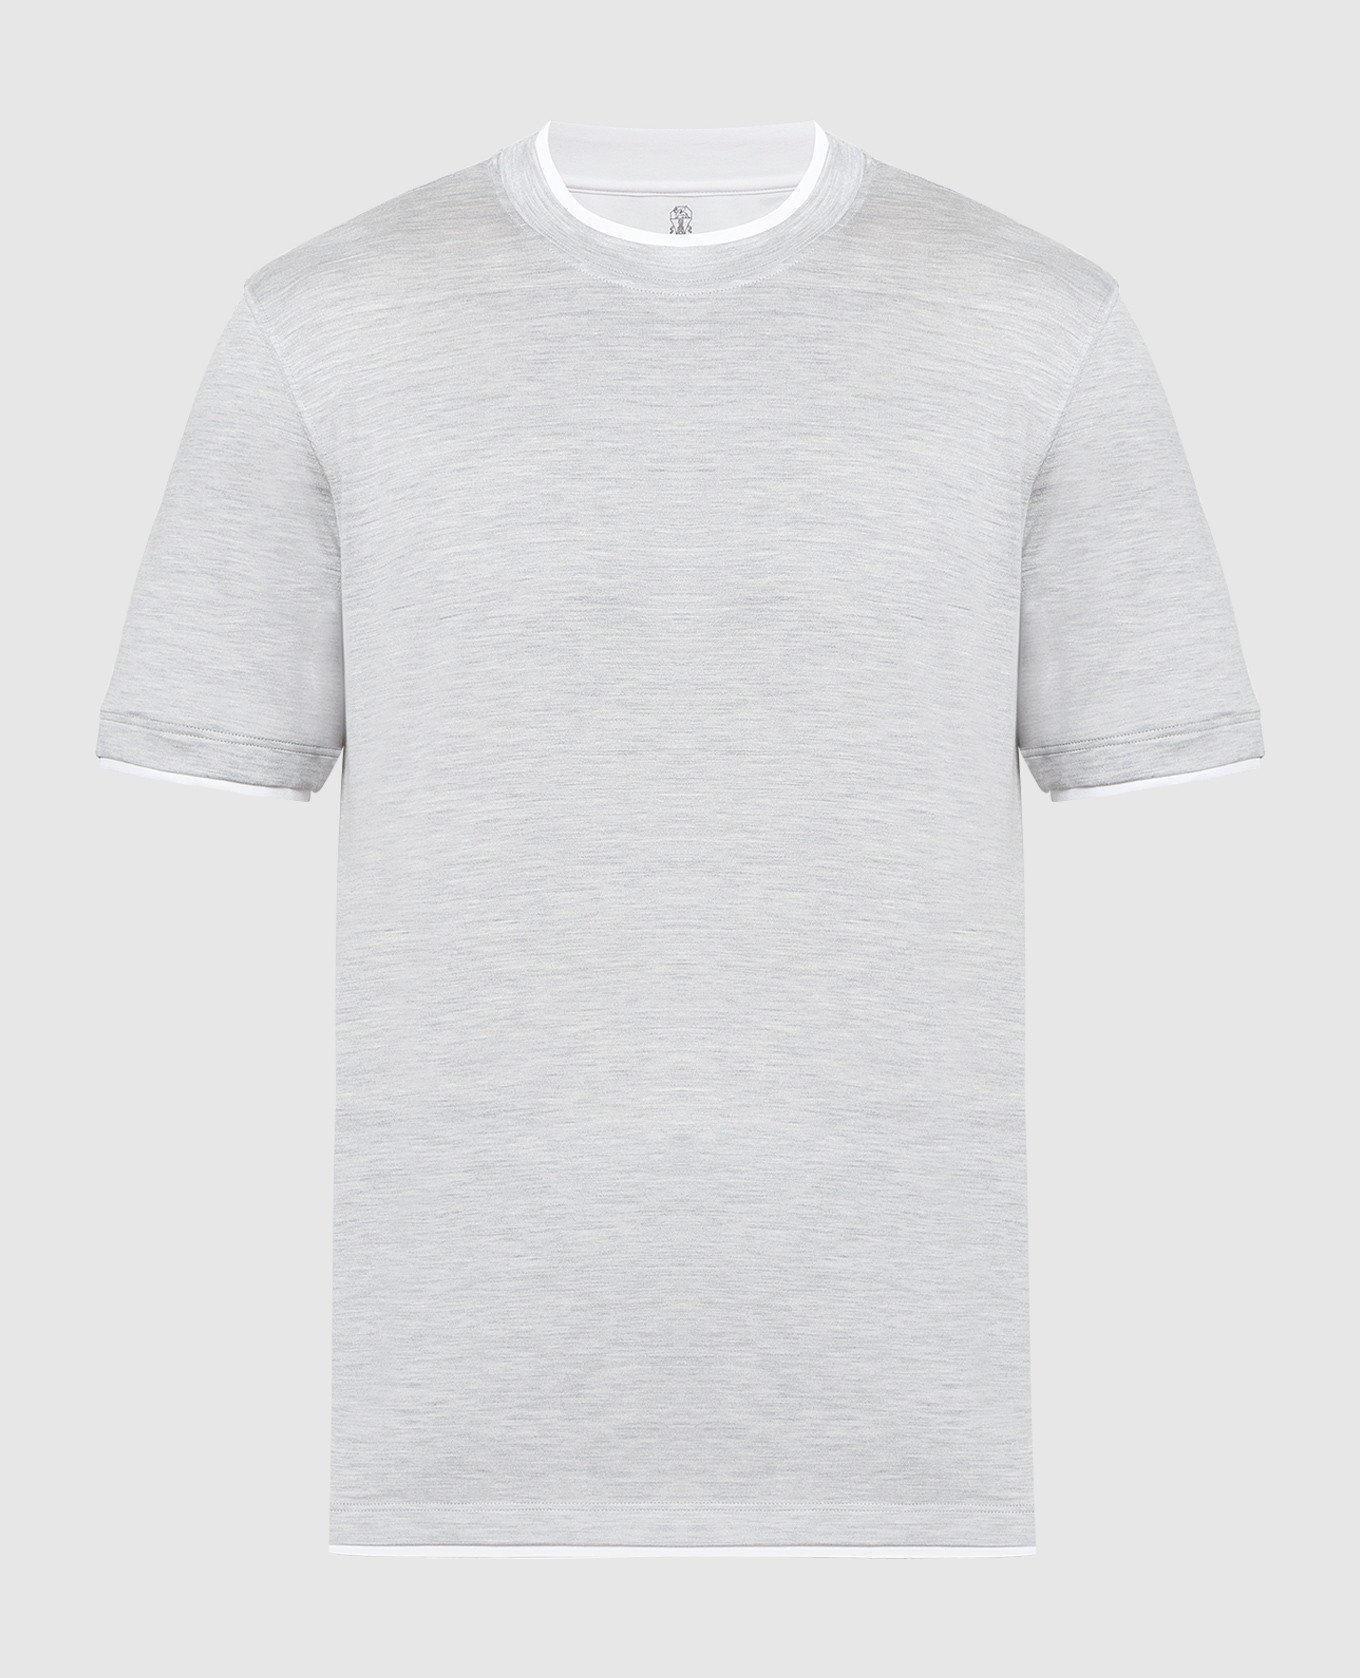 Gray melange t-shirt with layering effect